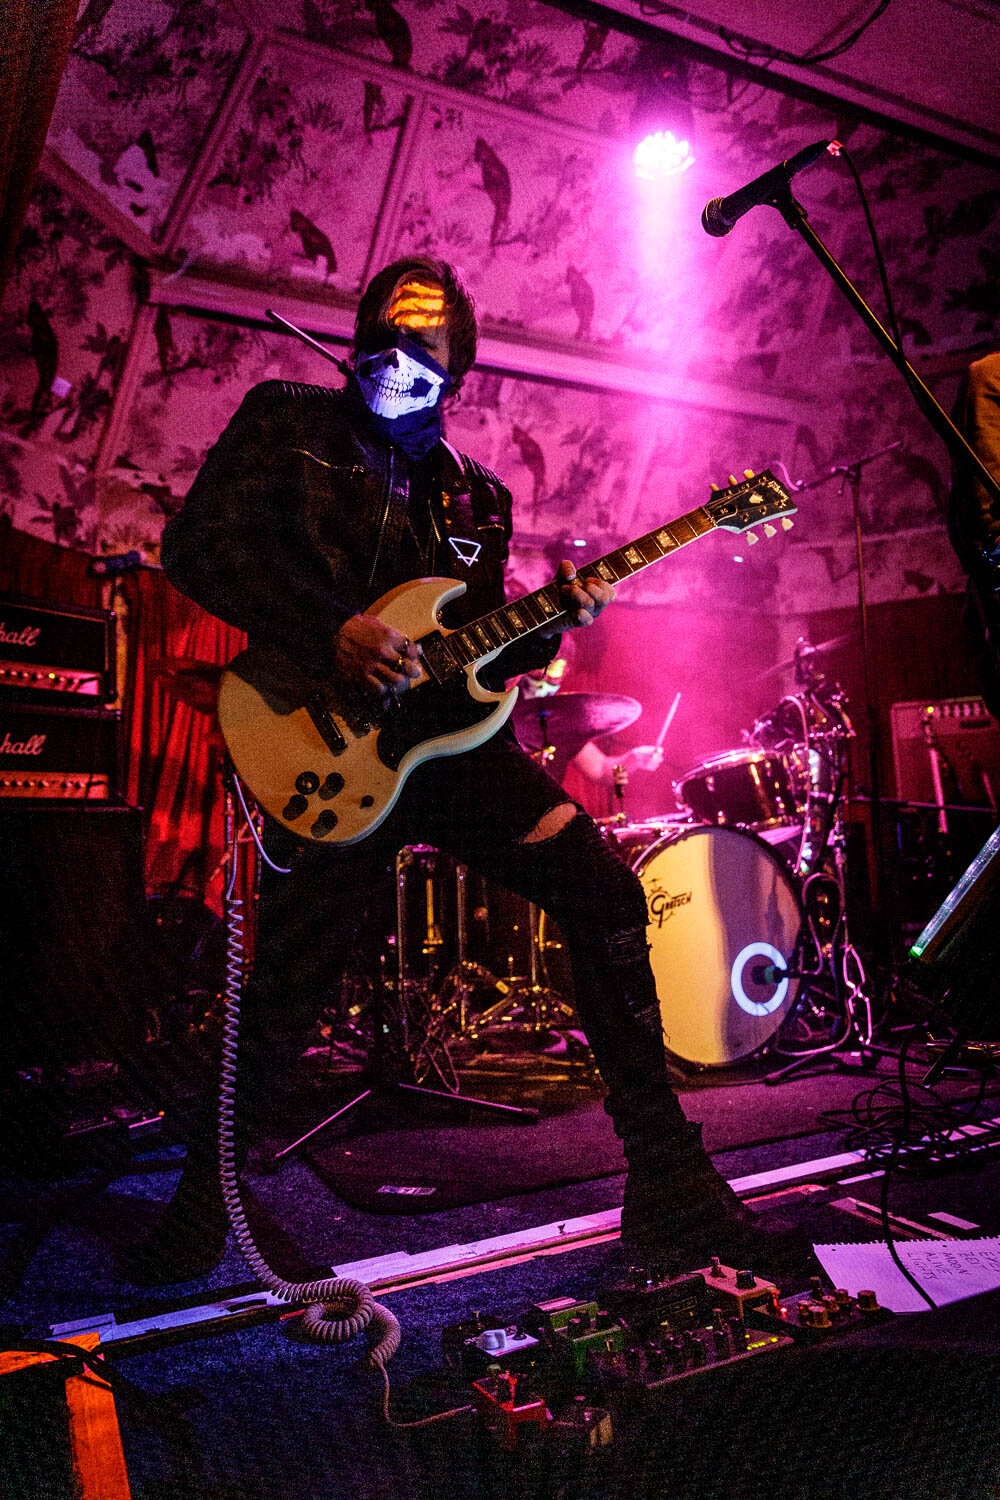 The New Death Cult at The Deaf Institute in Manchester on February 10th 2020 